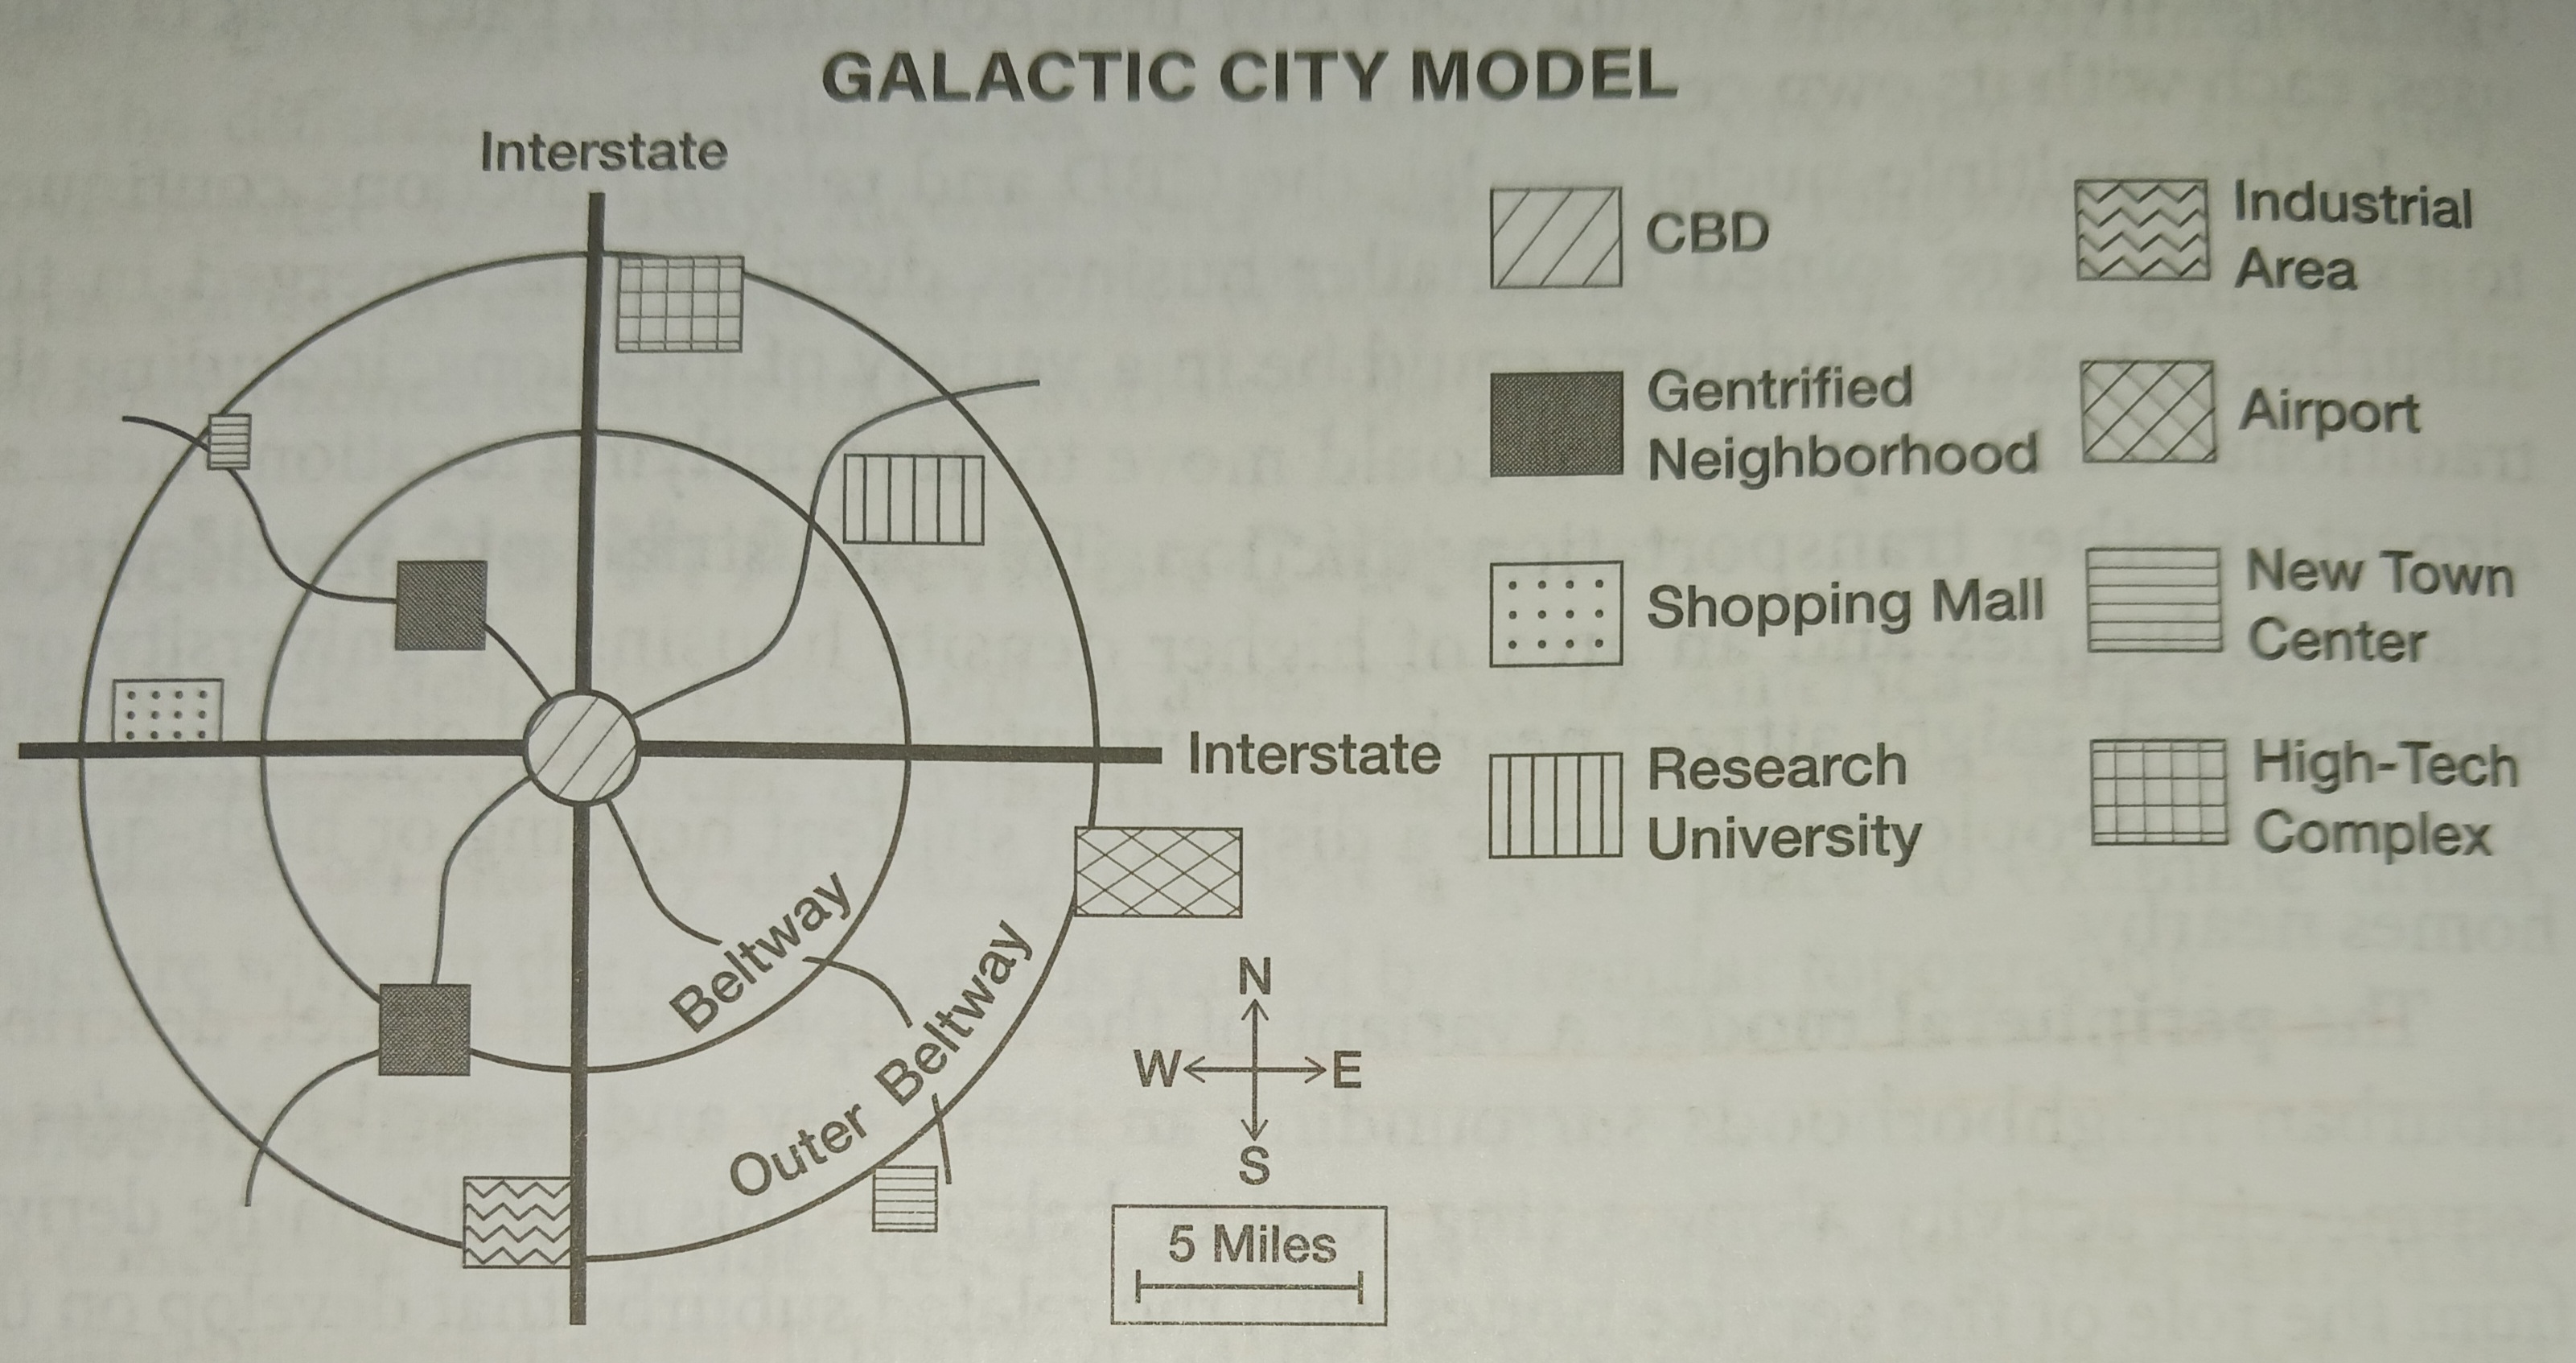 <p><strong>Pros:</strong></p><p>1. <strong>Expands on the Multiple Nuclei Model:</strong> The Galactic City concept builds upon the Multiple Nuclei Model by illustrating how the automobile and suburbanization have influenced urban development. It shows how mass-produced suburban forms, like Levittowns, have become common across the country, regardless of local geography.</p><p>2. <strong>Helps Understand Cultural Landscape:</strong> It helps cultural geographers understand the repetitive and mass-produced nature of the American landscape. The concept highlights how local diversity has been replaced by standardized forms created by corporations, like McDonald's, and embraced by people who choose housing that looks the same everywhere.</p><p>3. <strong>Relevance in the Telecommuting Era:</strong> With the rise of telecommuting facilitated by the internet, the Galactic City concept becomes increasingly relevant. It suggests that people may want urban amenities even in rural areas, leading to the spread of urban elements beyond traditional city boundaries.</p><p><strong>Cons:</strong></p><p>1. <strong>Not Urban-Centric:</strong> The Galactic City concept isn't specifically focused on urban areas, so it might not be very useful for describing cities, especially from an economic perspective.</p><p>2. <strong>Limited Application to Rural Areas:</strong> It doesn't apply well to genuinely rural areas, which still make up a significant portion of the US. The concept mainly focuses on urban forms near major road junctions and incorporates urban structures into rural towns, leaving much of the rural landscape unaccounted for.</p>